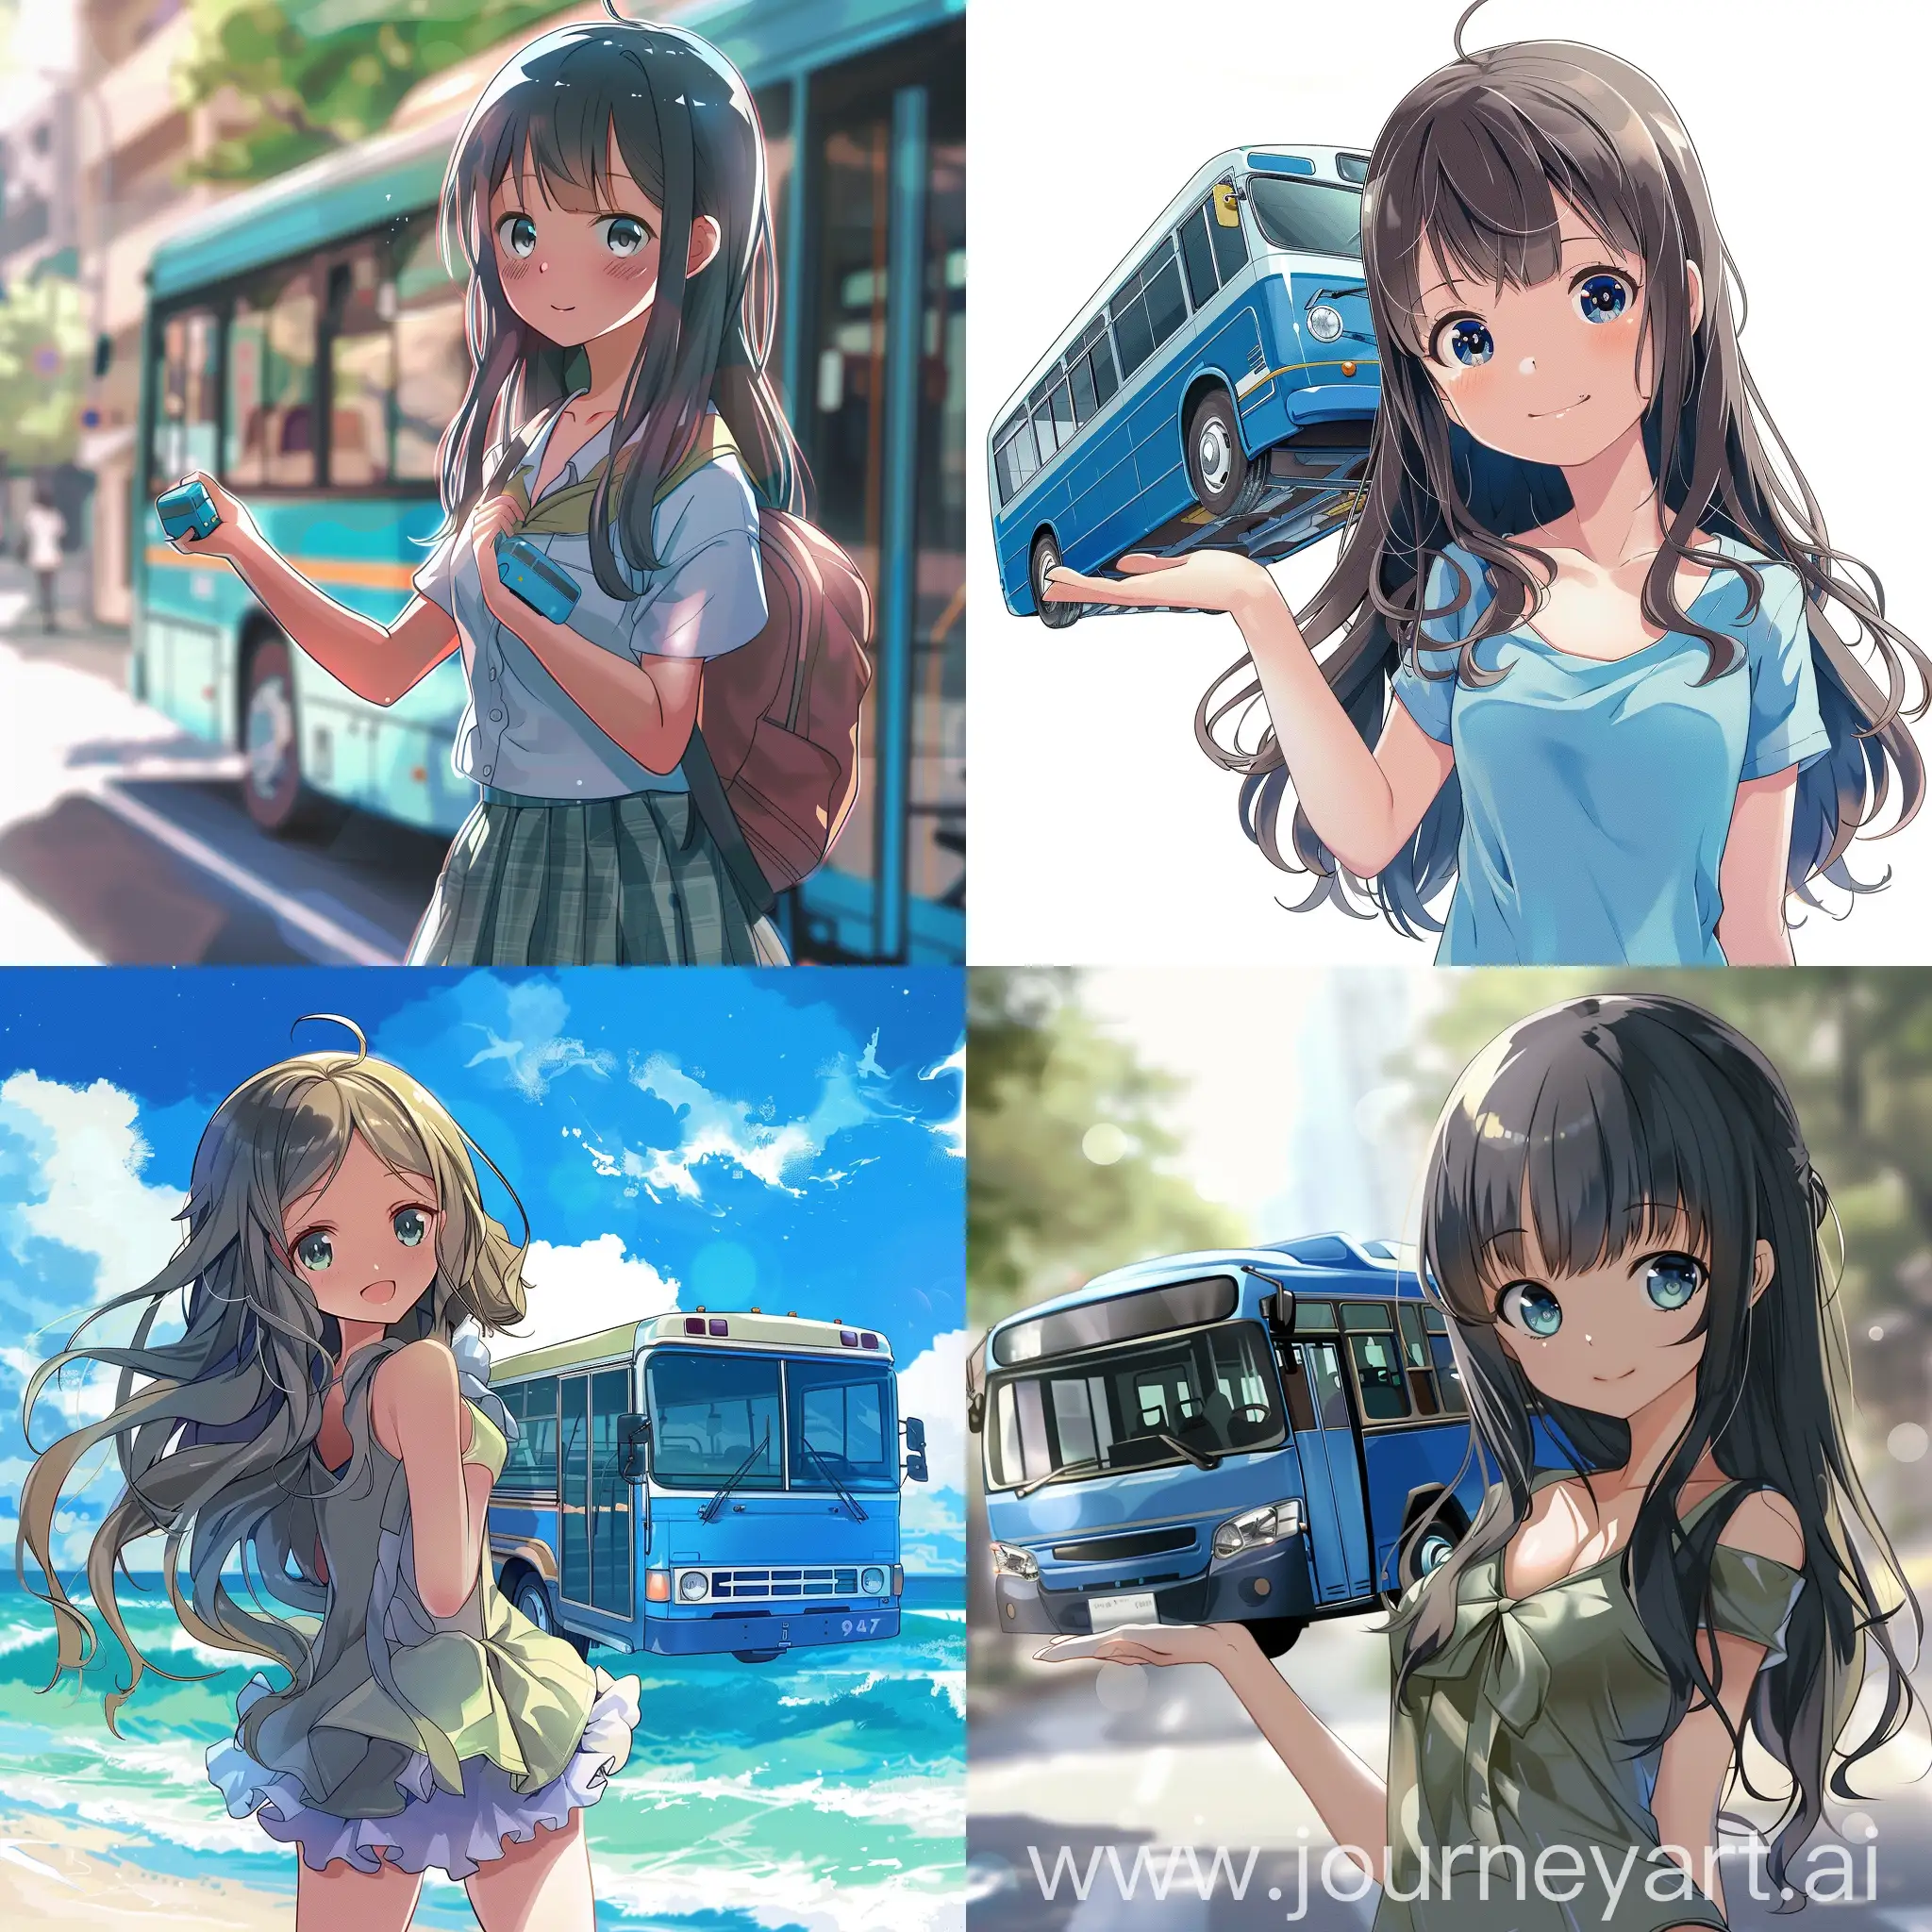 Anime-Girl-Holding-Blue-Bus-Whimsical-Anime-Character-with-Playful-Prop